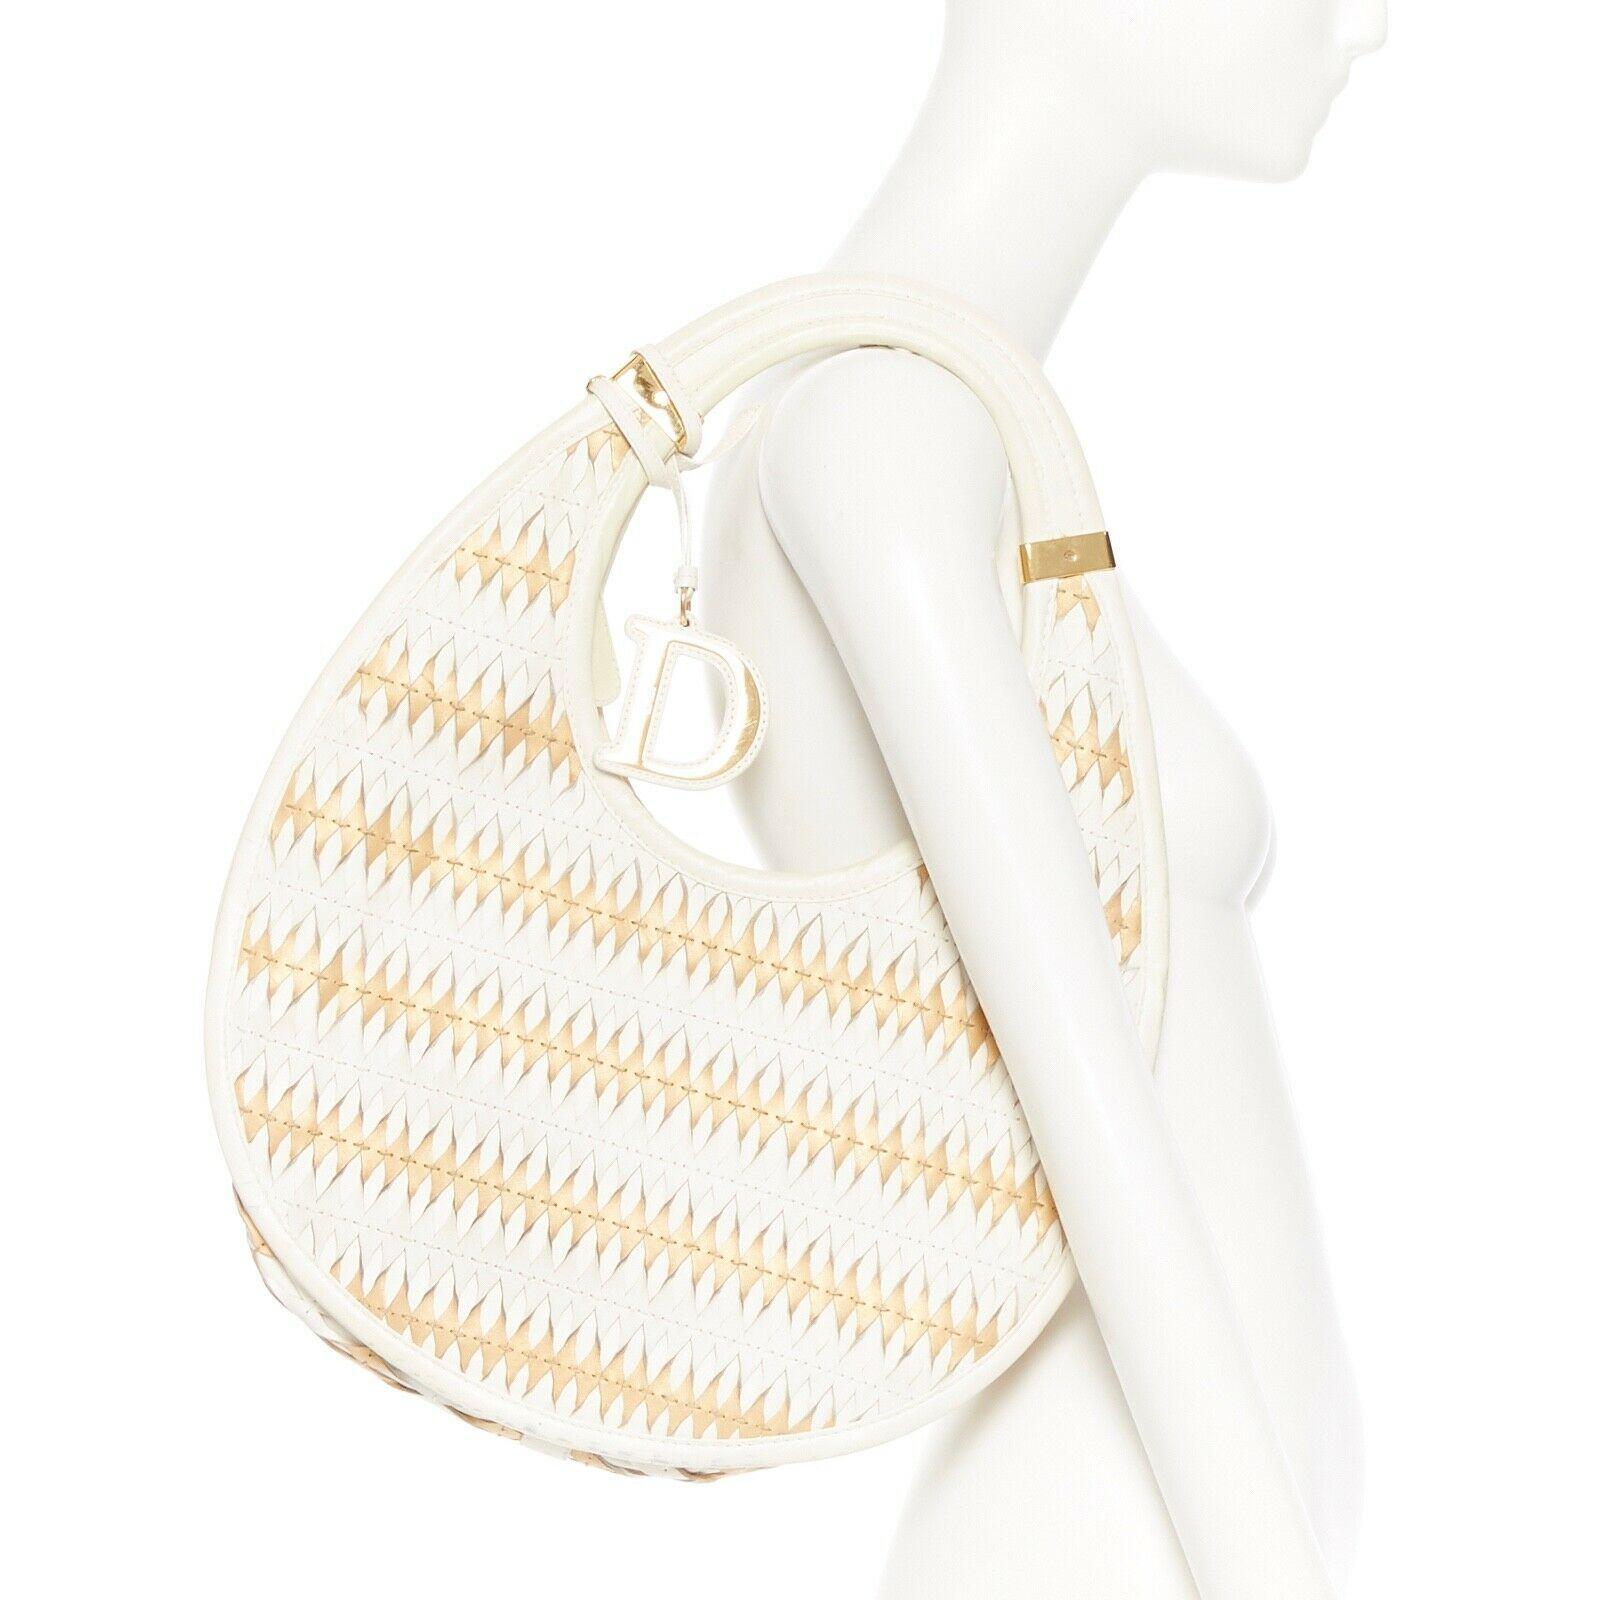 DIOR diorita white gold crescent wove 3D laser cut twist filter leather hobo bag
DIOR BY JOHN GALLIANO
Dior Diorita style. 
Crescent shaped hobo bag. 
White and gold leather upper. 
Laser-cut, twisted and weaved designs. 
Unique 3D effect. 
Gold